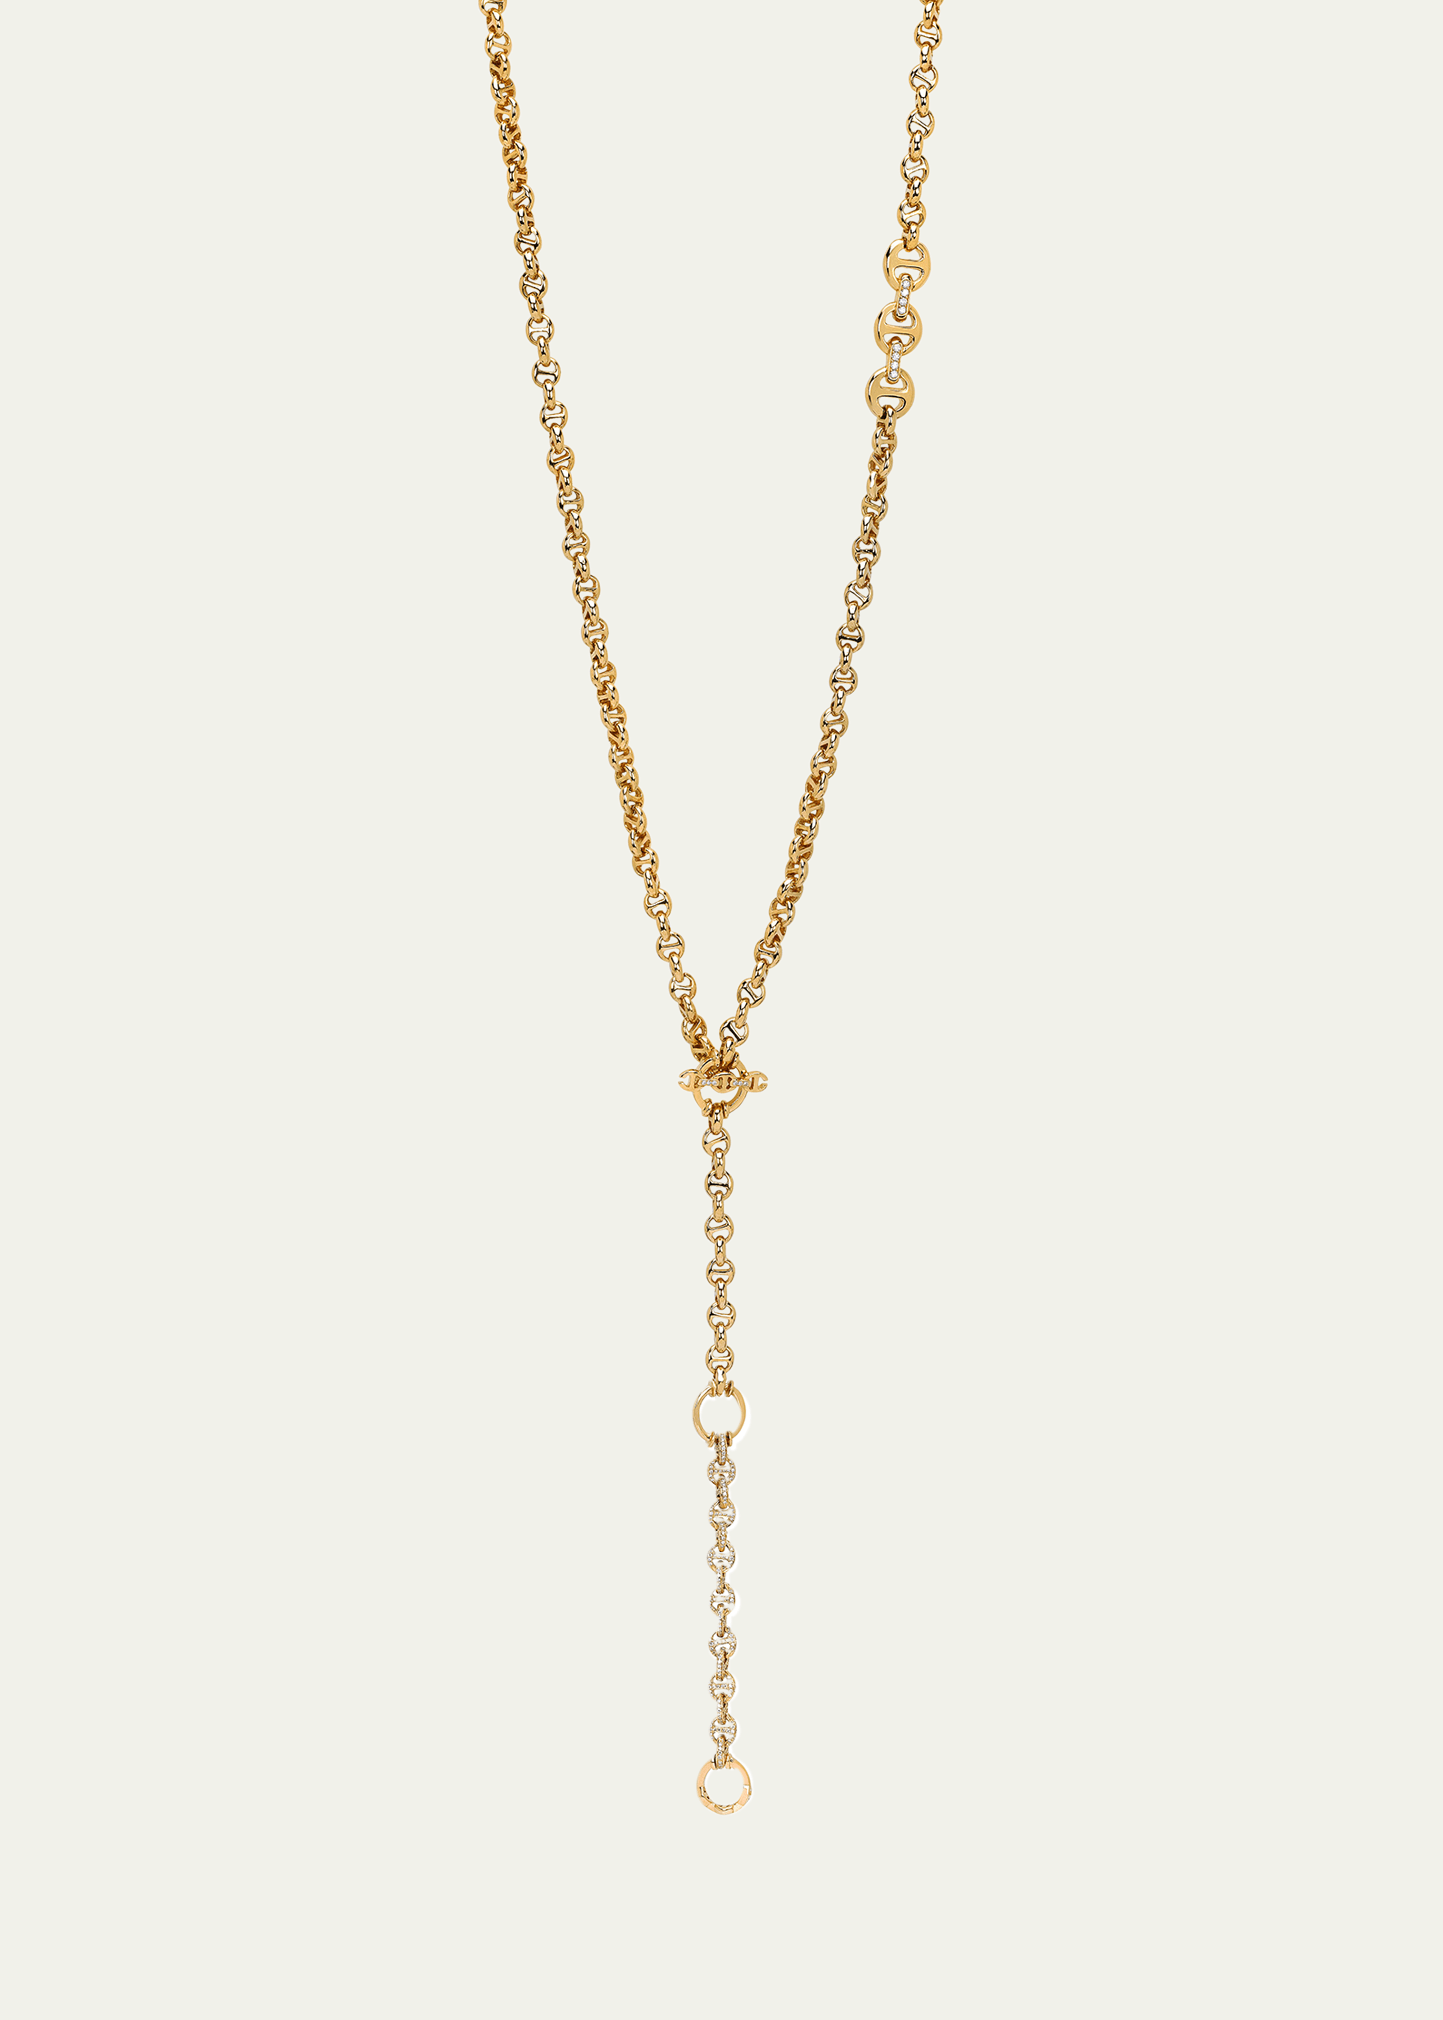 18K Yellow Gold 5mm Open Link Necklace with White Diamond Pendant and Toggle, 30"L